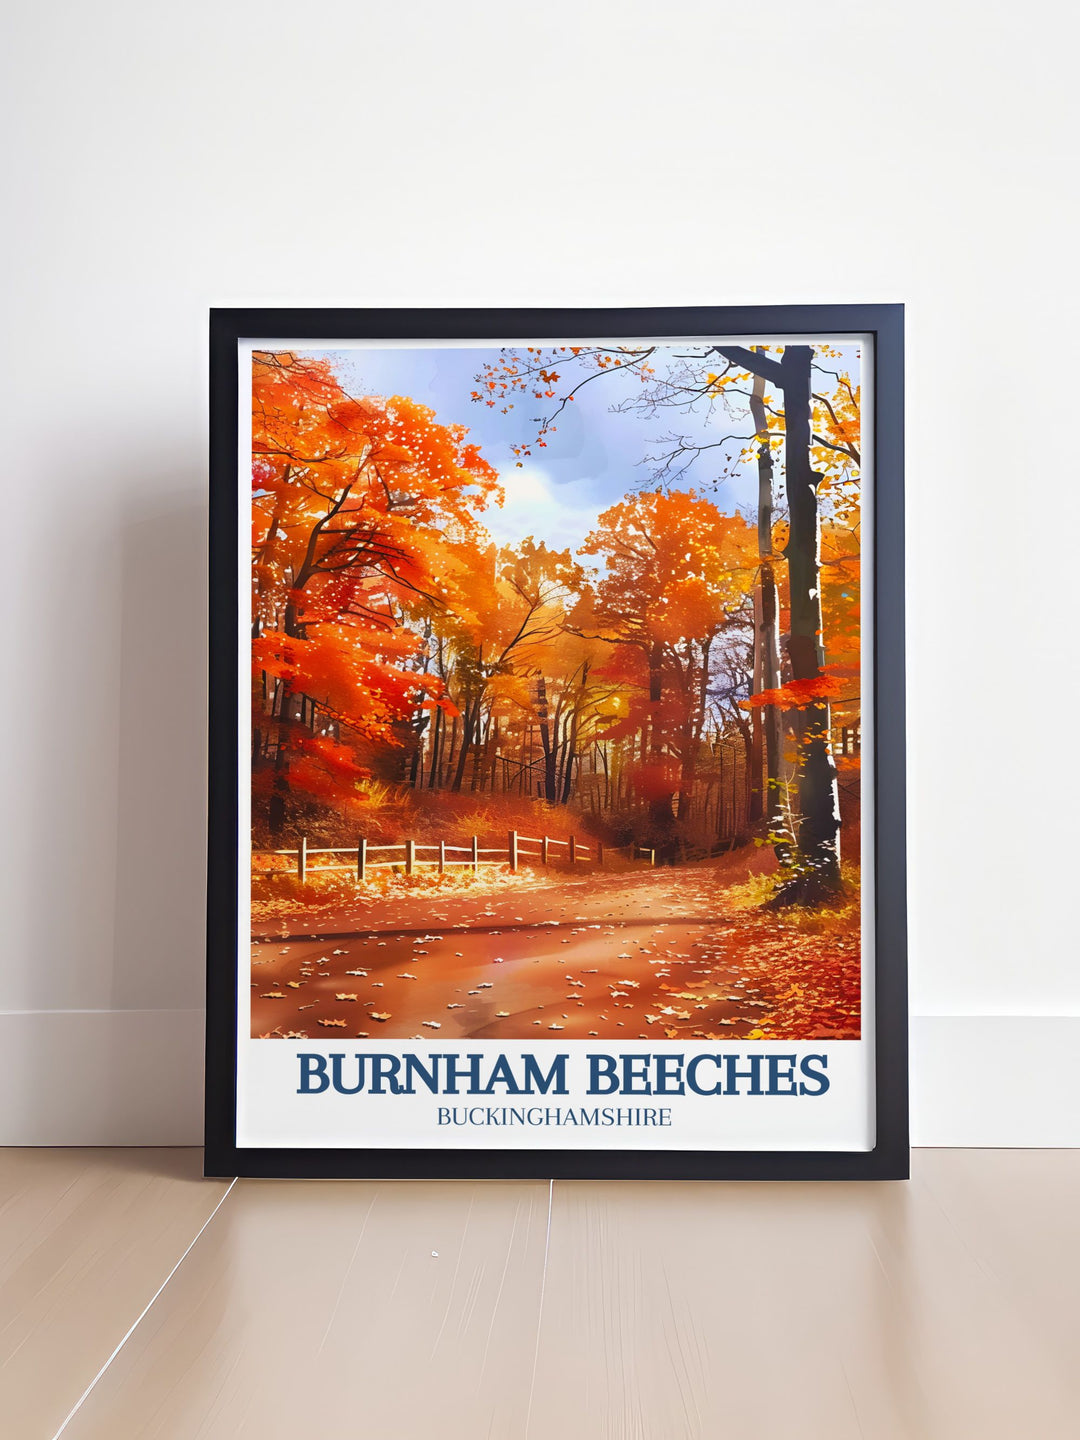 This poster artfully depicts the natural beauty of Burnham Beeches and the historic charm of Farnham Common, offering a perfect blend of the UKs landscapes and cultural landmarks for your decor.